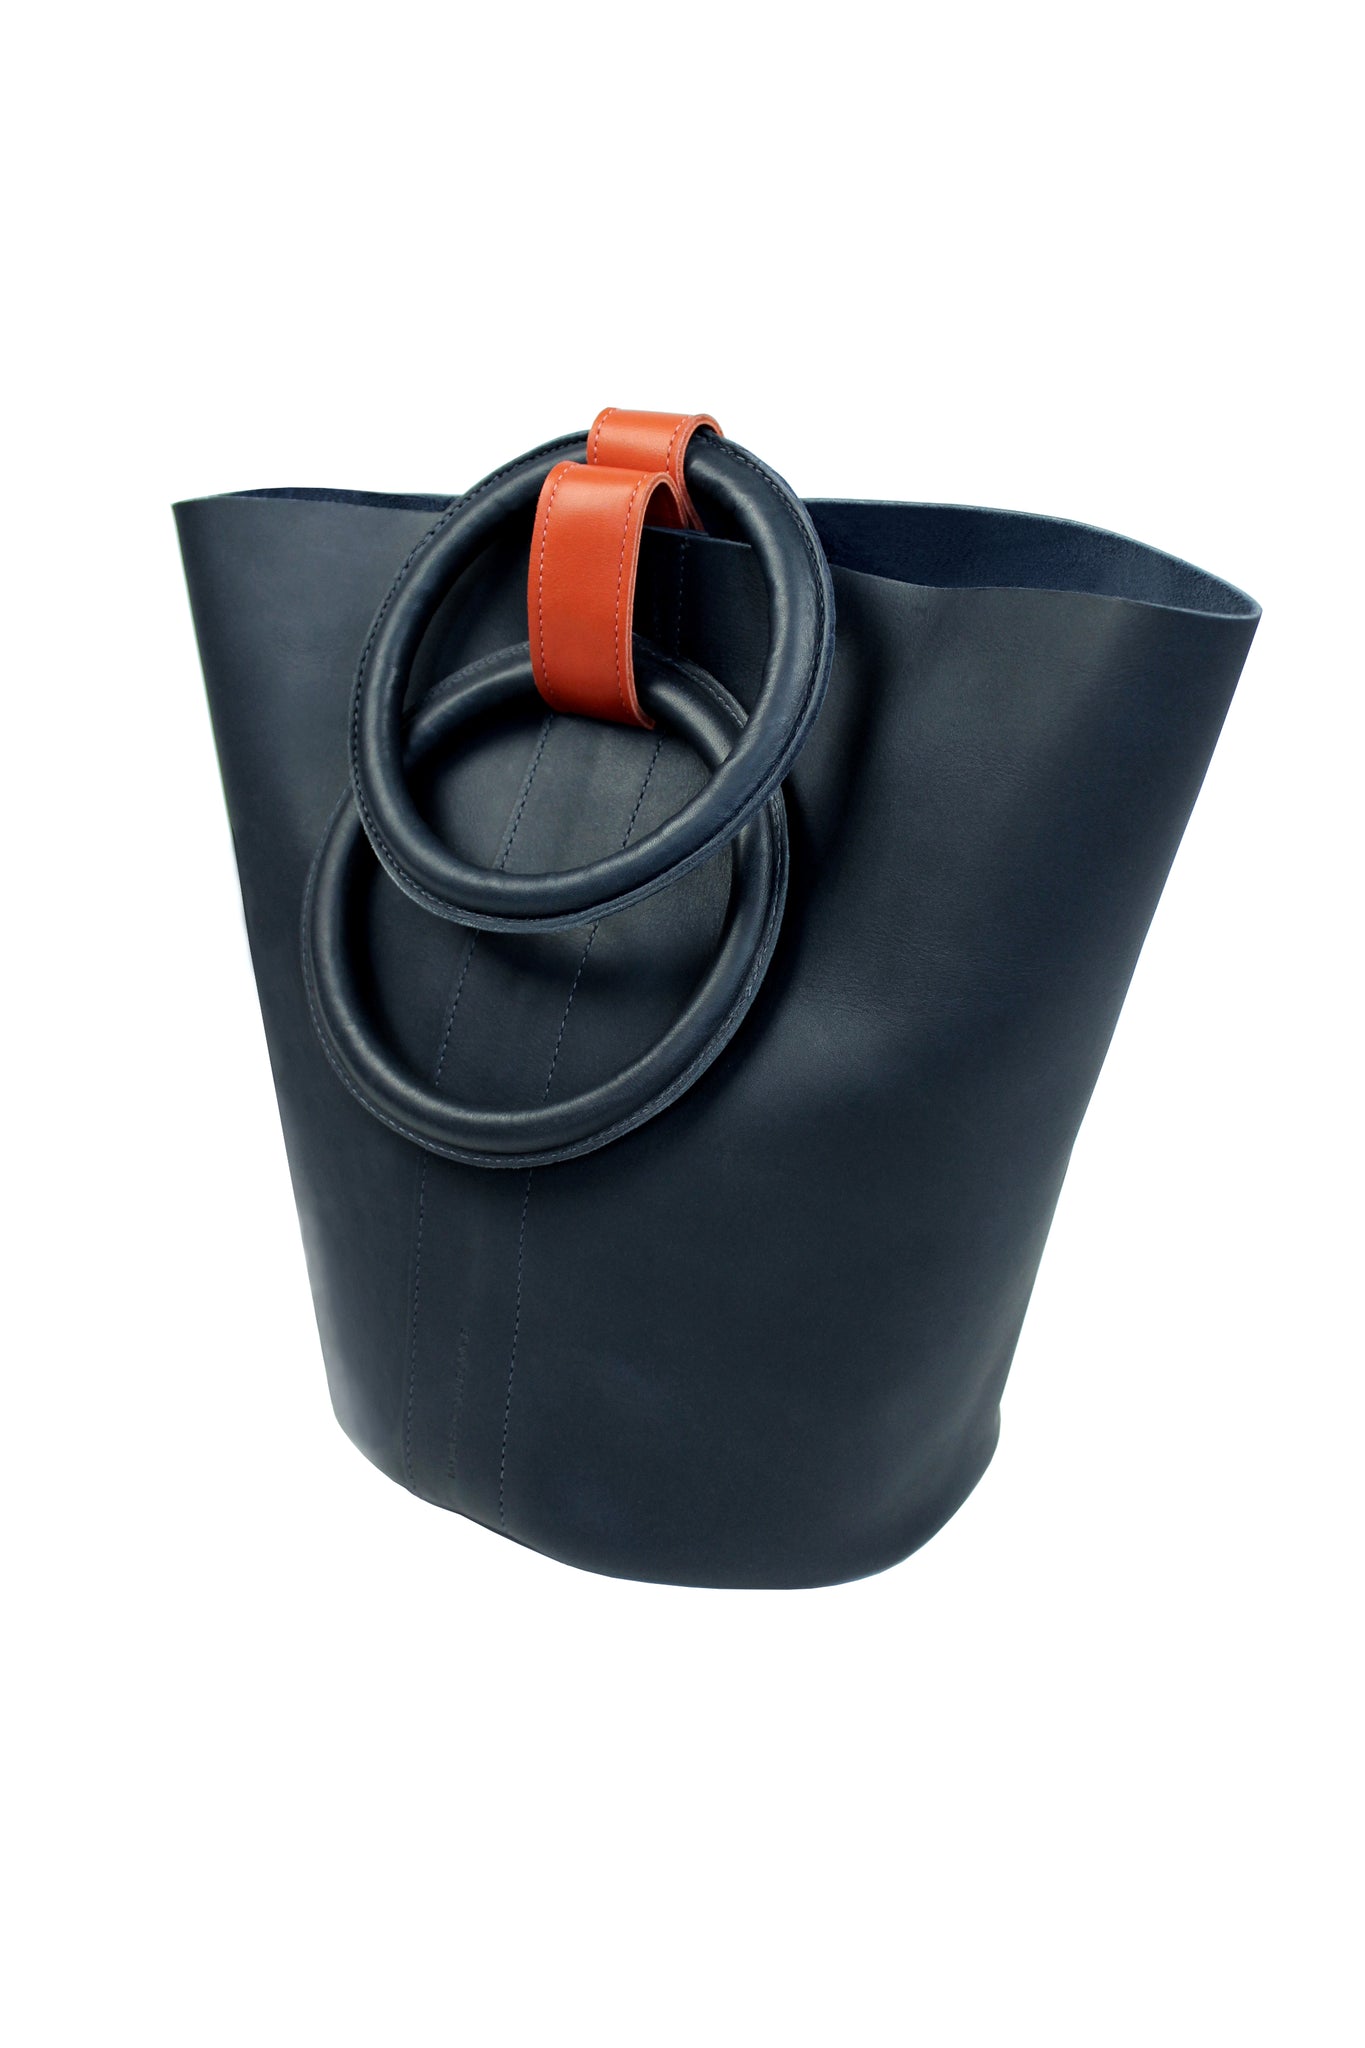 Myers Collective Small Round Bucket Navy